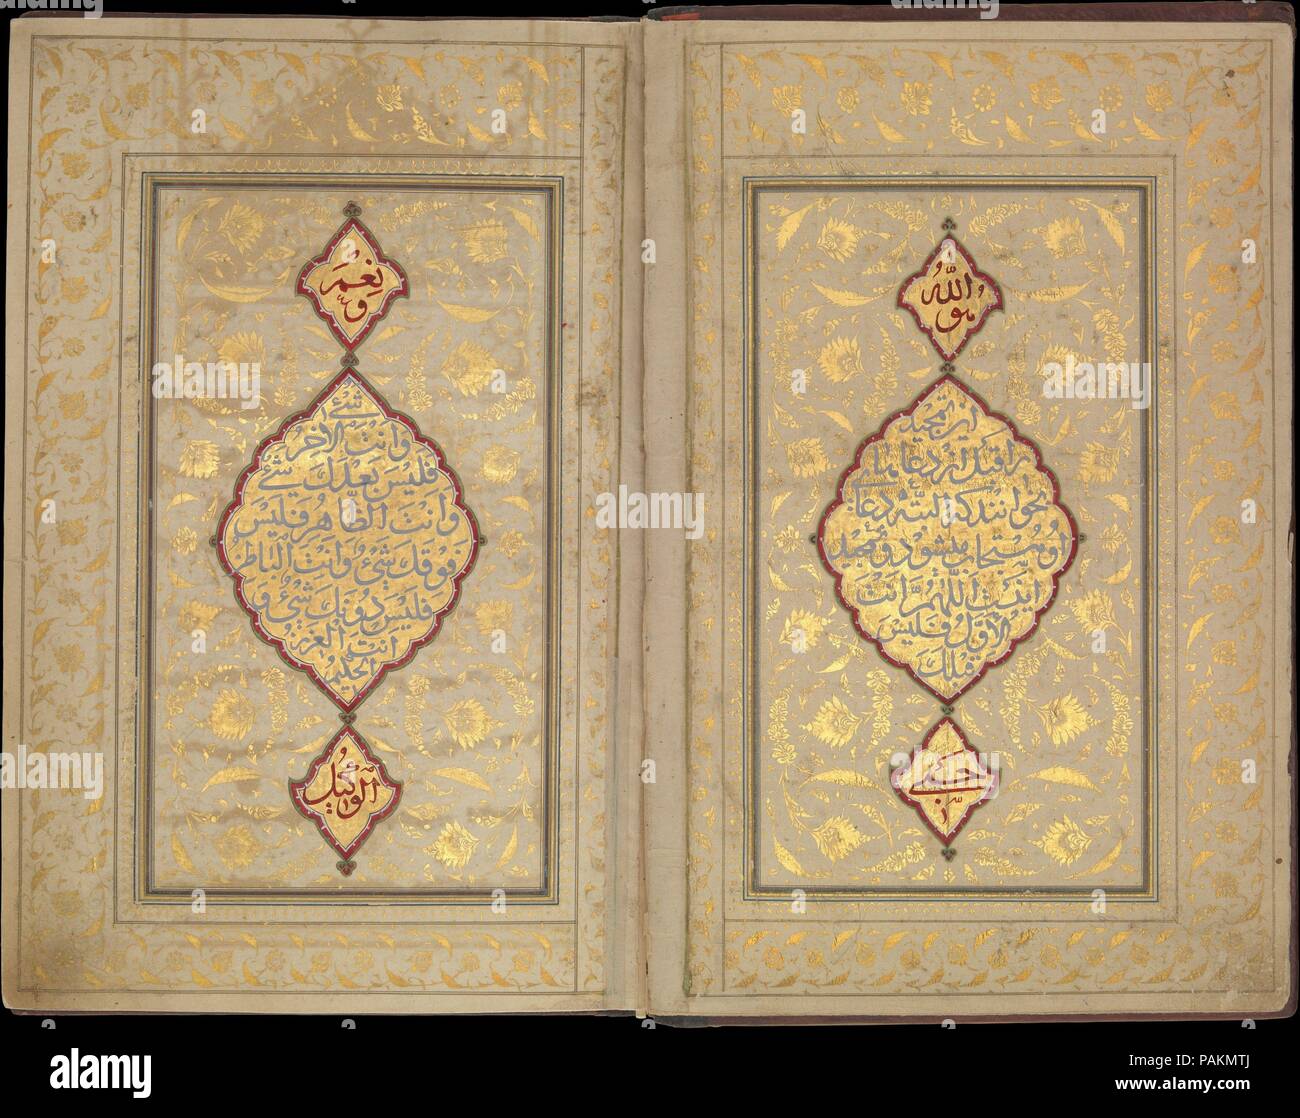 Book of Prayers, Surat al-Yasin and Surat al-Fath. Calligrapher: Ahmad Nairizi (active 1682-1739). Dimensions: H. 9 3/4 in. (24.7 cm)  W. 6 1/8 in. (15.6 cm). Illuminator: (attributed to) Muhammad Hadi (d. ca. 1771). Date: dated A.H. 1132/A.D. 1719-20.  This prayer book reflects the fusion of Indian and Iranian manuscript illumination in the eighteenth century. It contains the Surat al-Yasin and the Surat al-Fath (Victory) copied by the celebrated master of revival naskh, Ahmad Nairizi, with illuminations attributed to the renowned Muhammad Hadi. The color palette and decoration of naturalisti Stock Photo